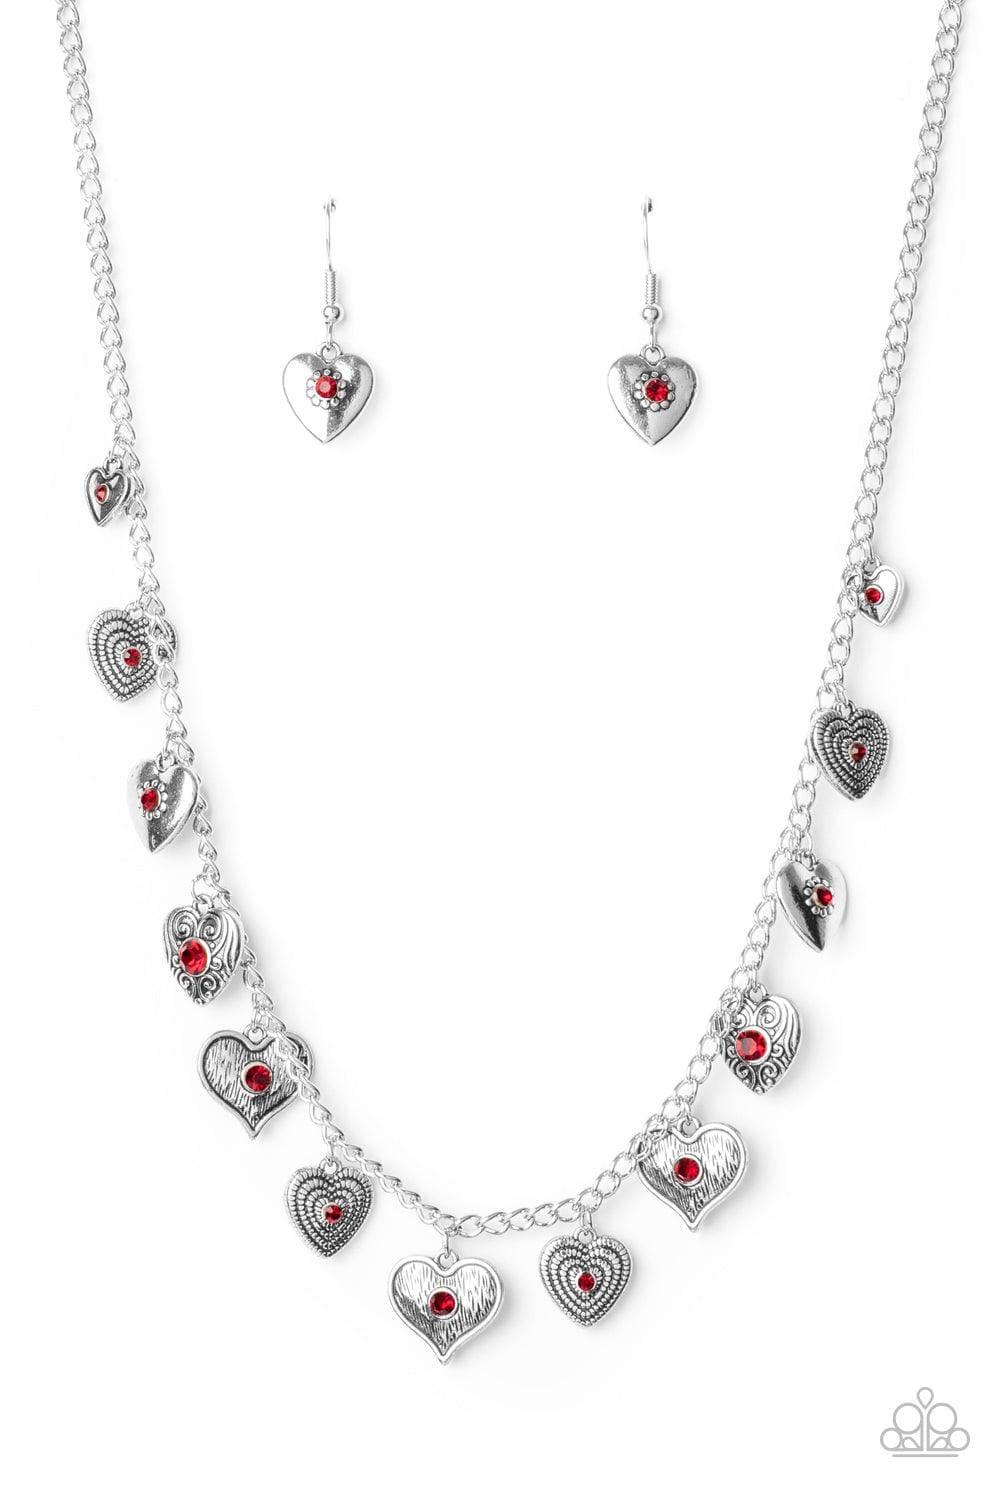 Paparazzi Accessories - Lovely Lockets - Red Necklace - Bling by JessieK